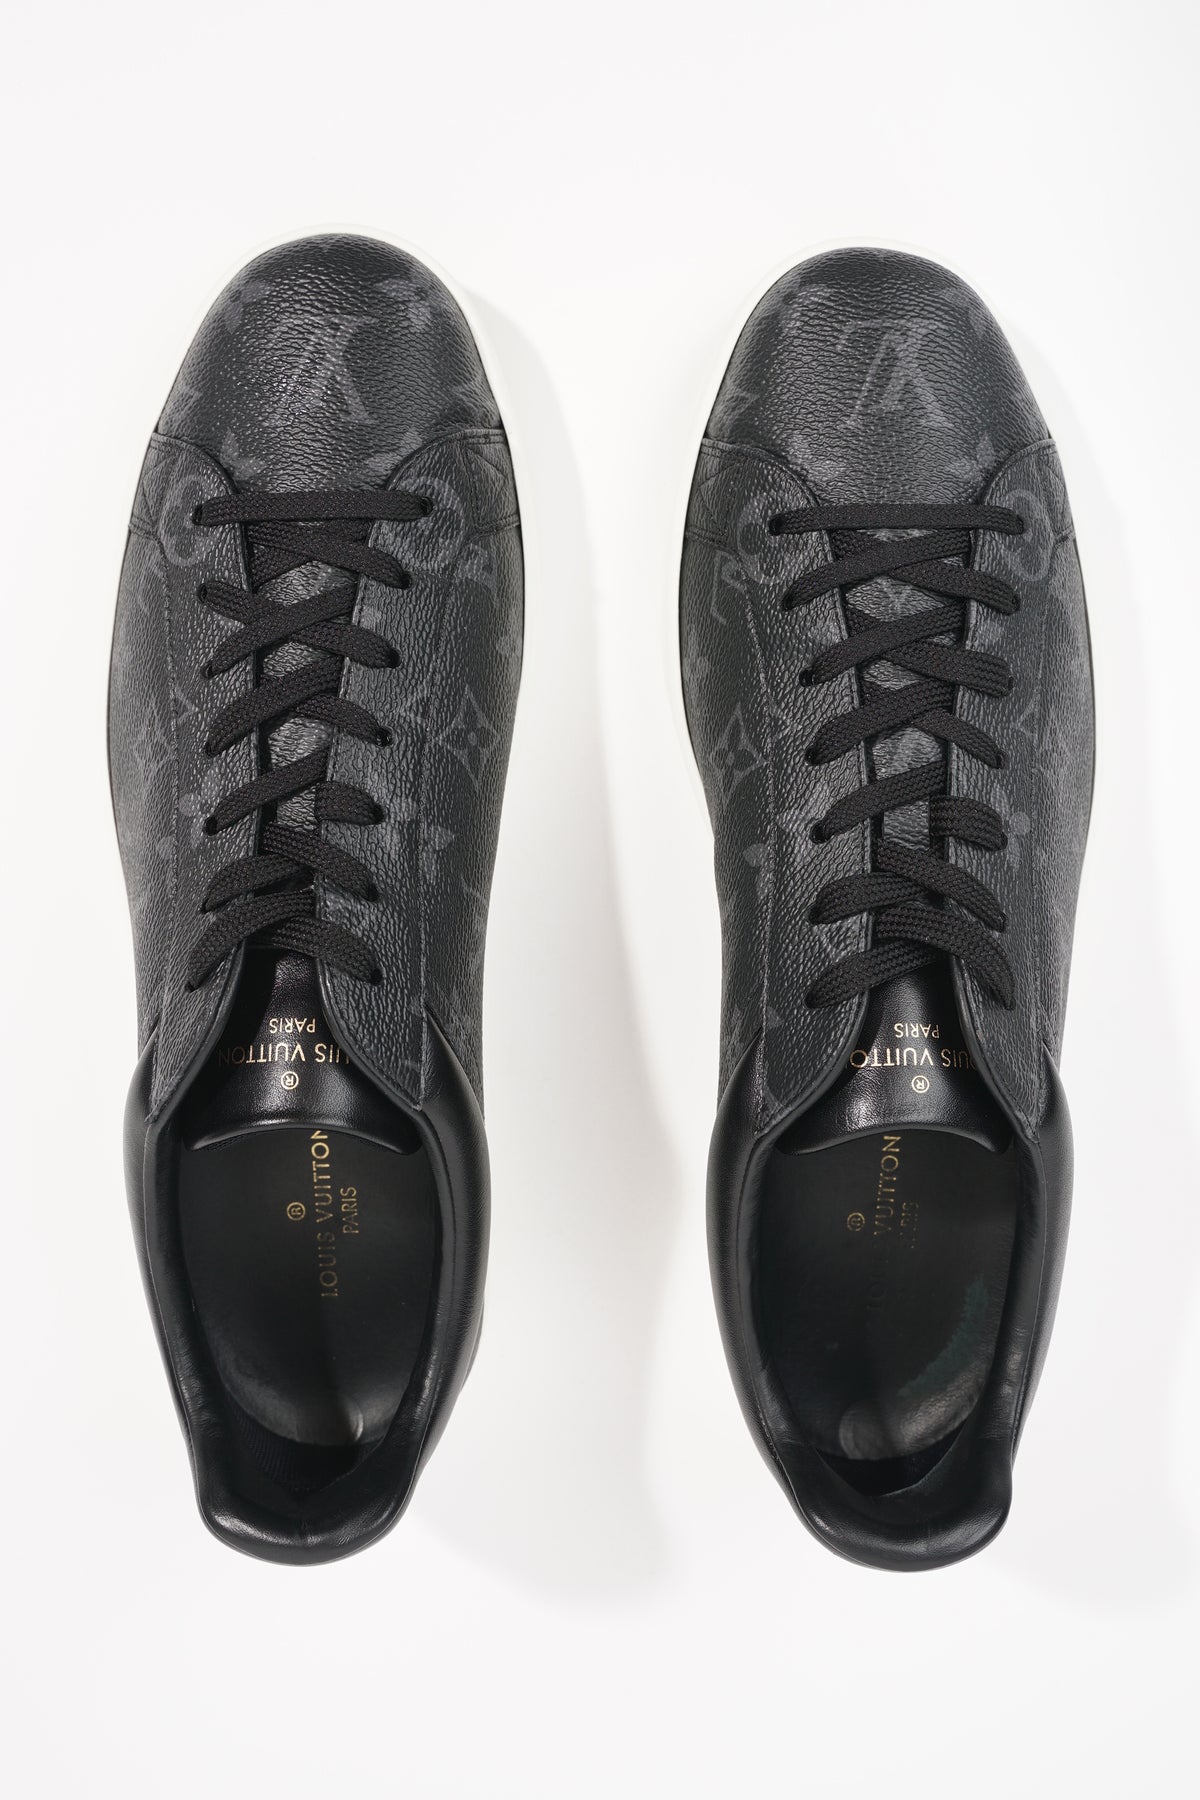 Louis Vuitton Black Leather Luxembourg Sneakers Size 42 Louis Vuitton